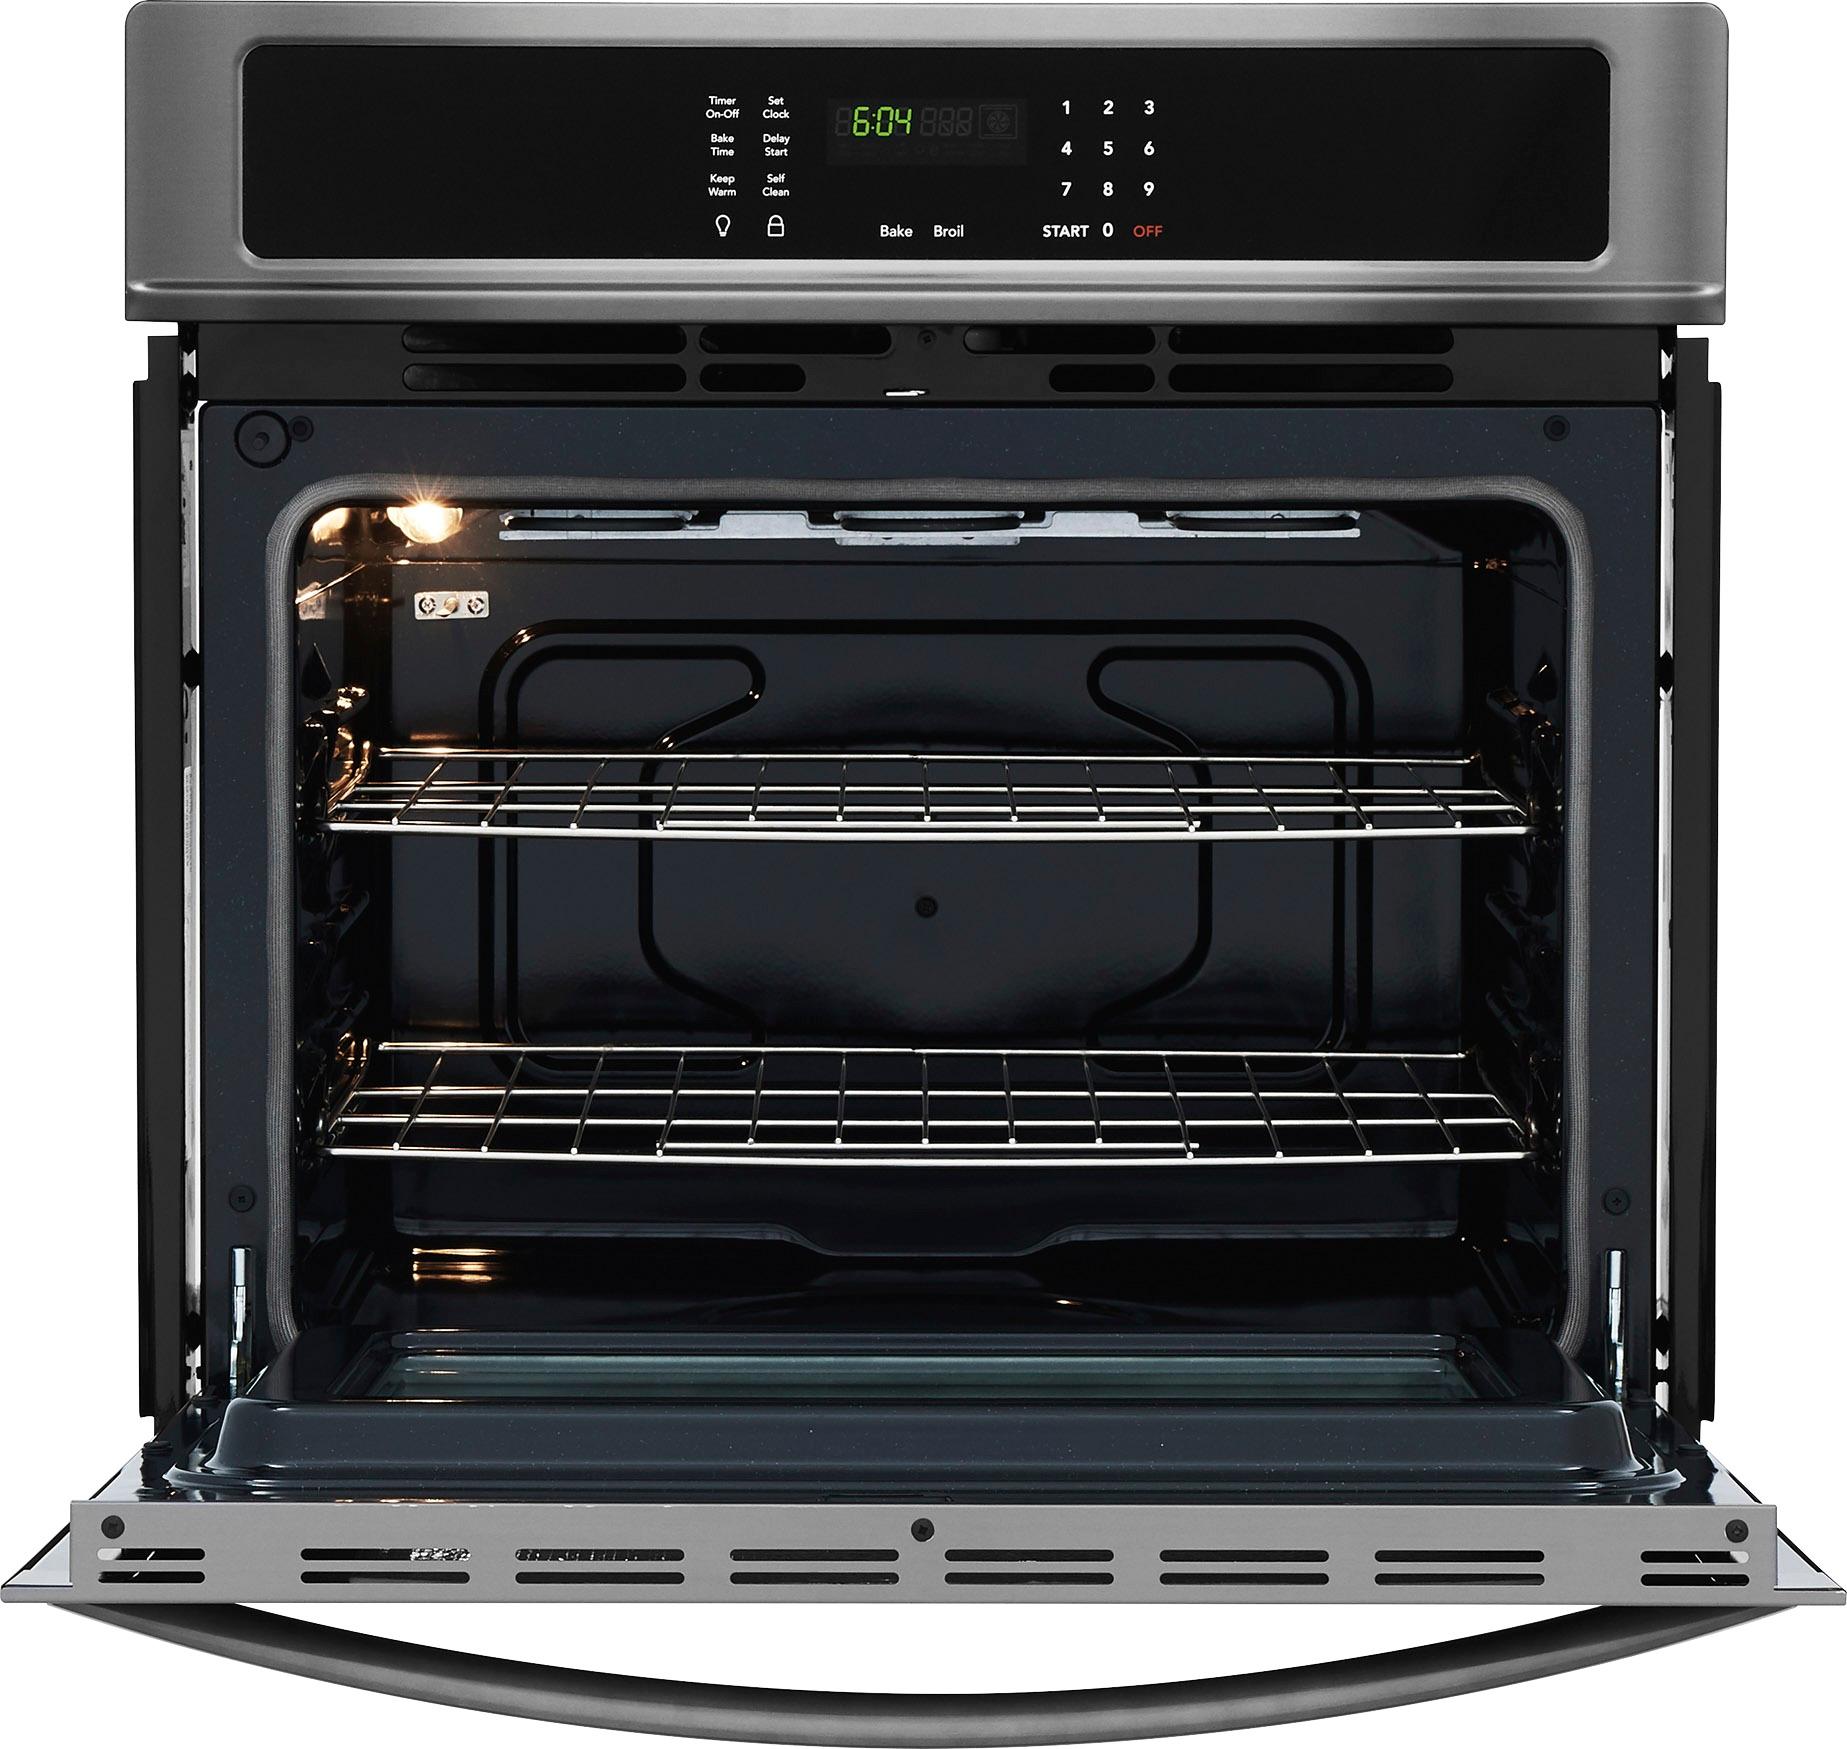 Frigidaire 30" Built-In Single Electric Wall Oven Black stainless steel Frigidaire Oven Black Stainless Steel